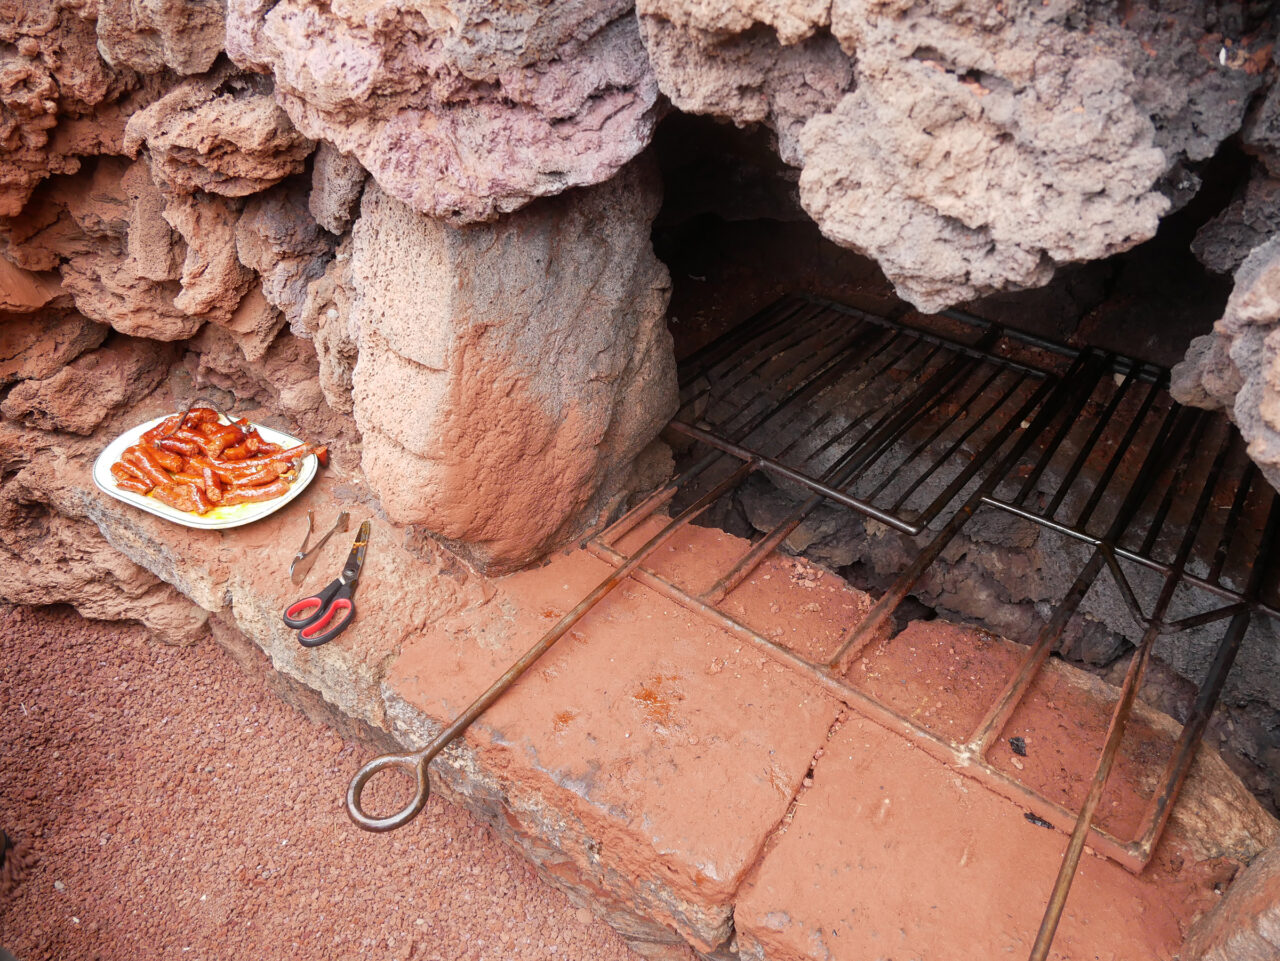 Cooking sausages using volcanic heat in Timanfaya National Park